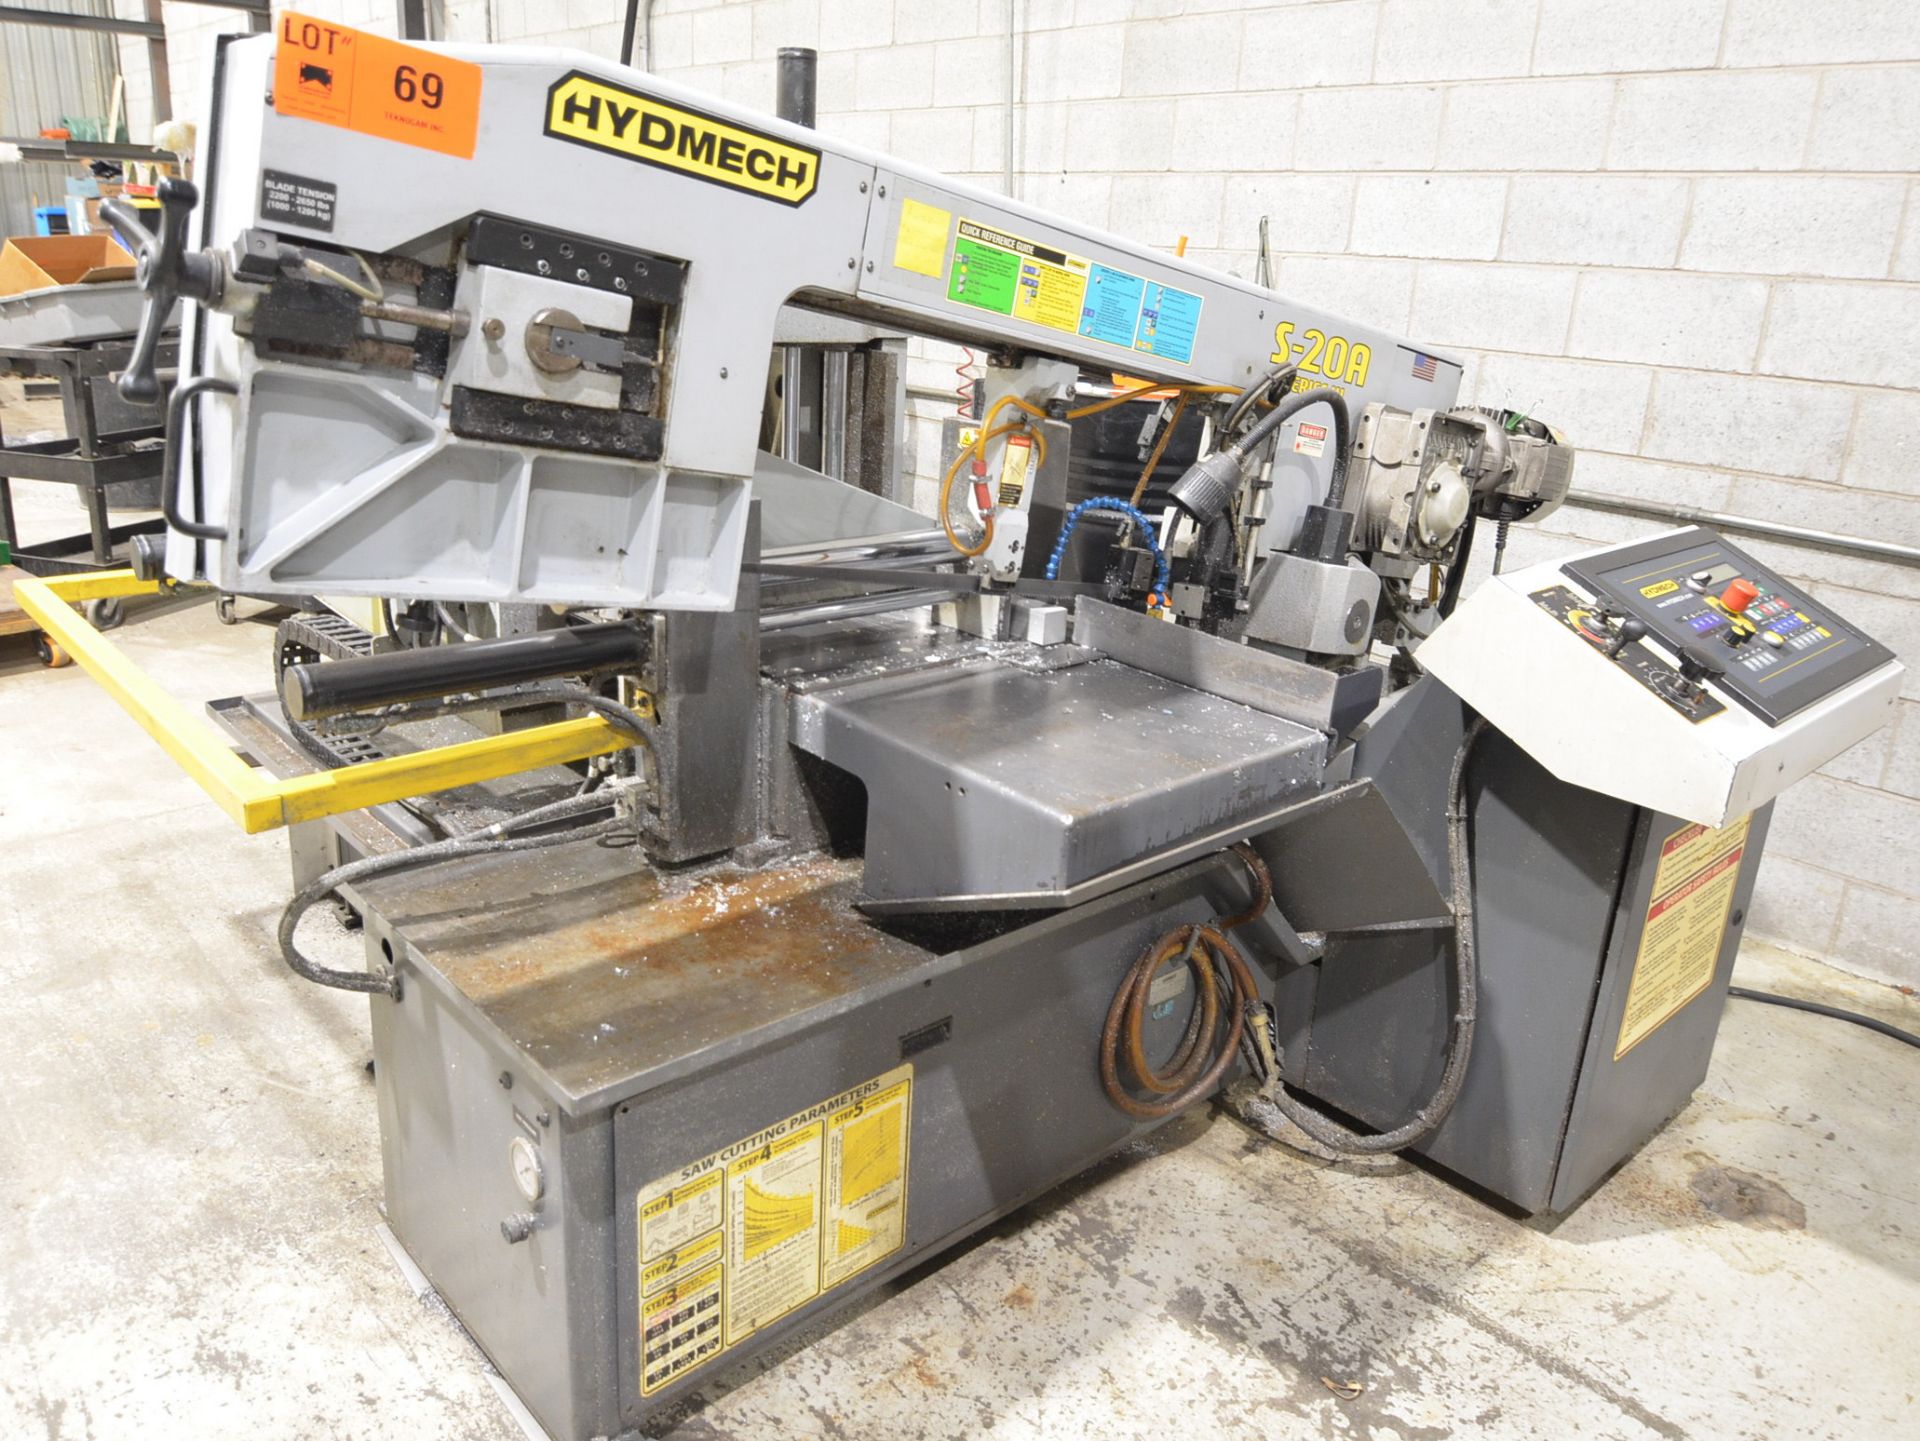 HYDMECH (2014) S-20A SERIES III AUTOMATIC HORIZONTAL PIVOT BAND SAW WITH 13"X18" MAX. CUTTING - Image 2 of 10